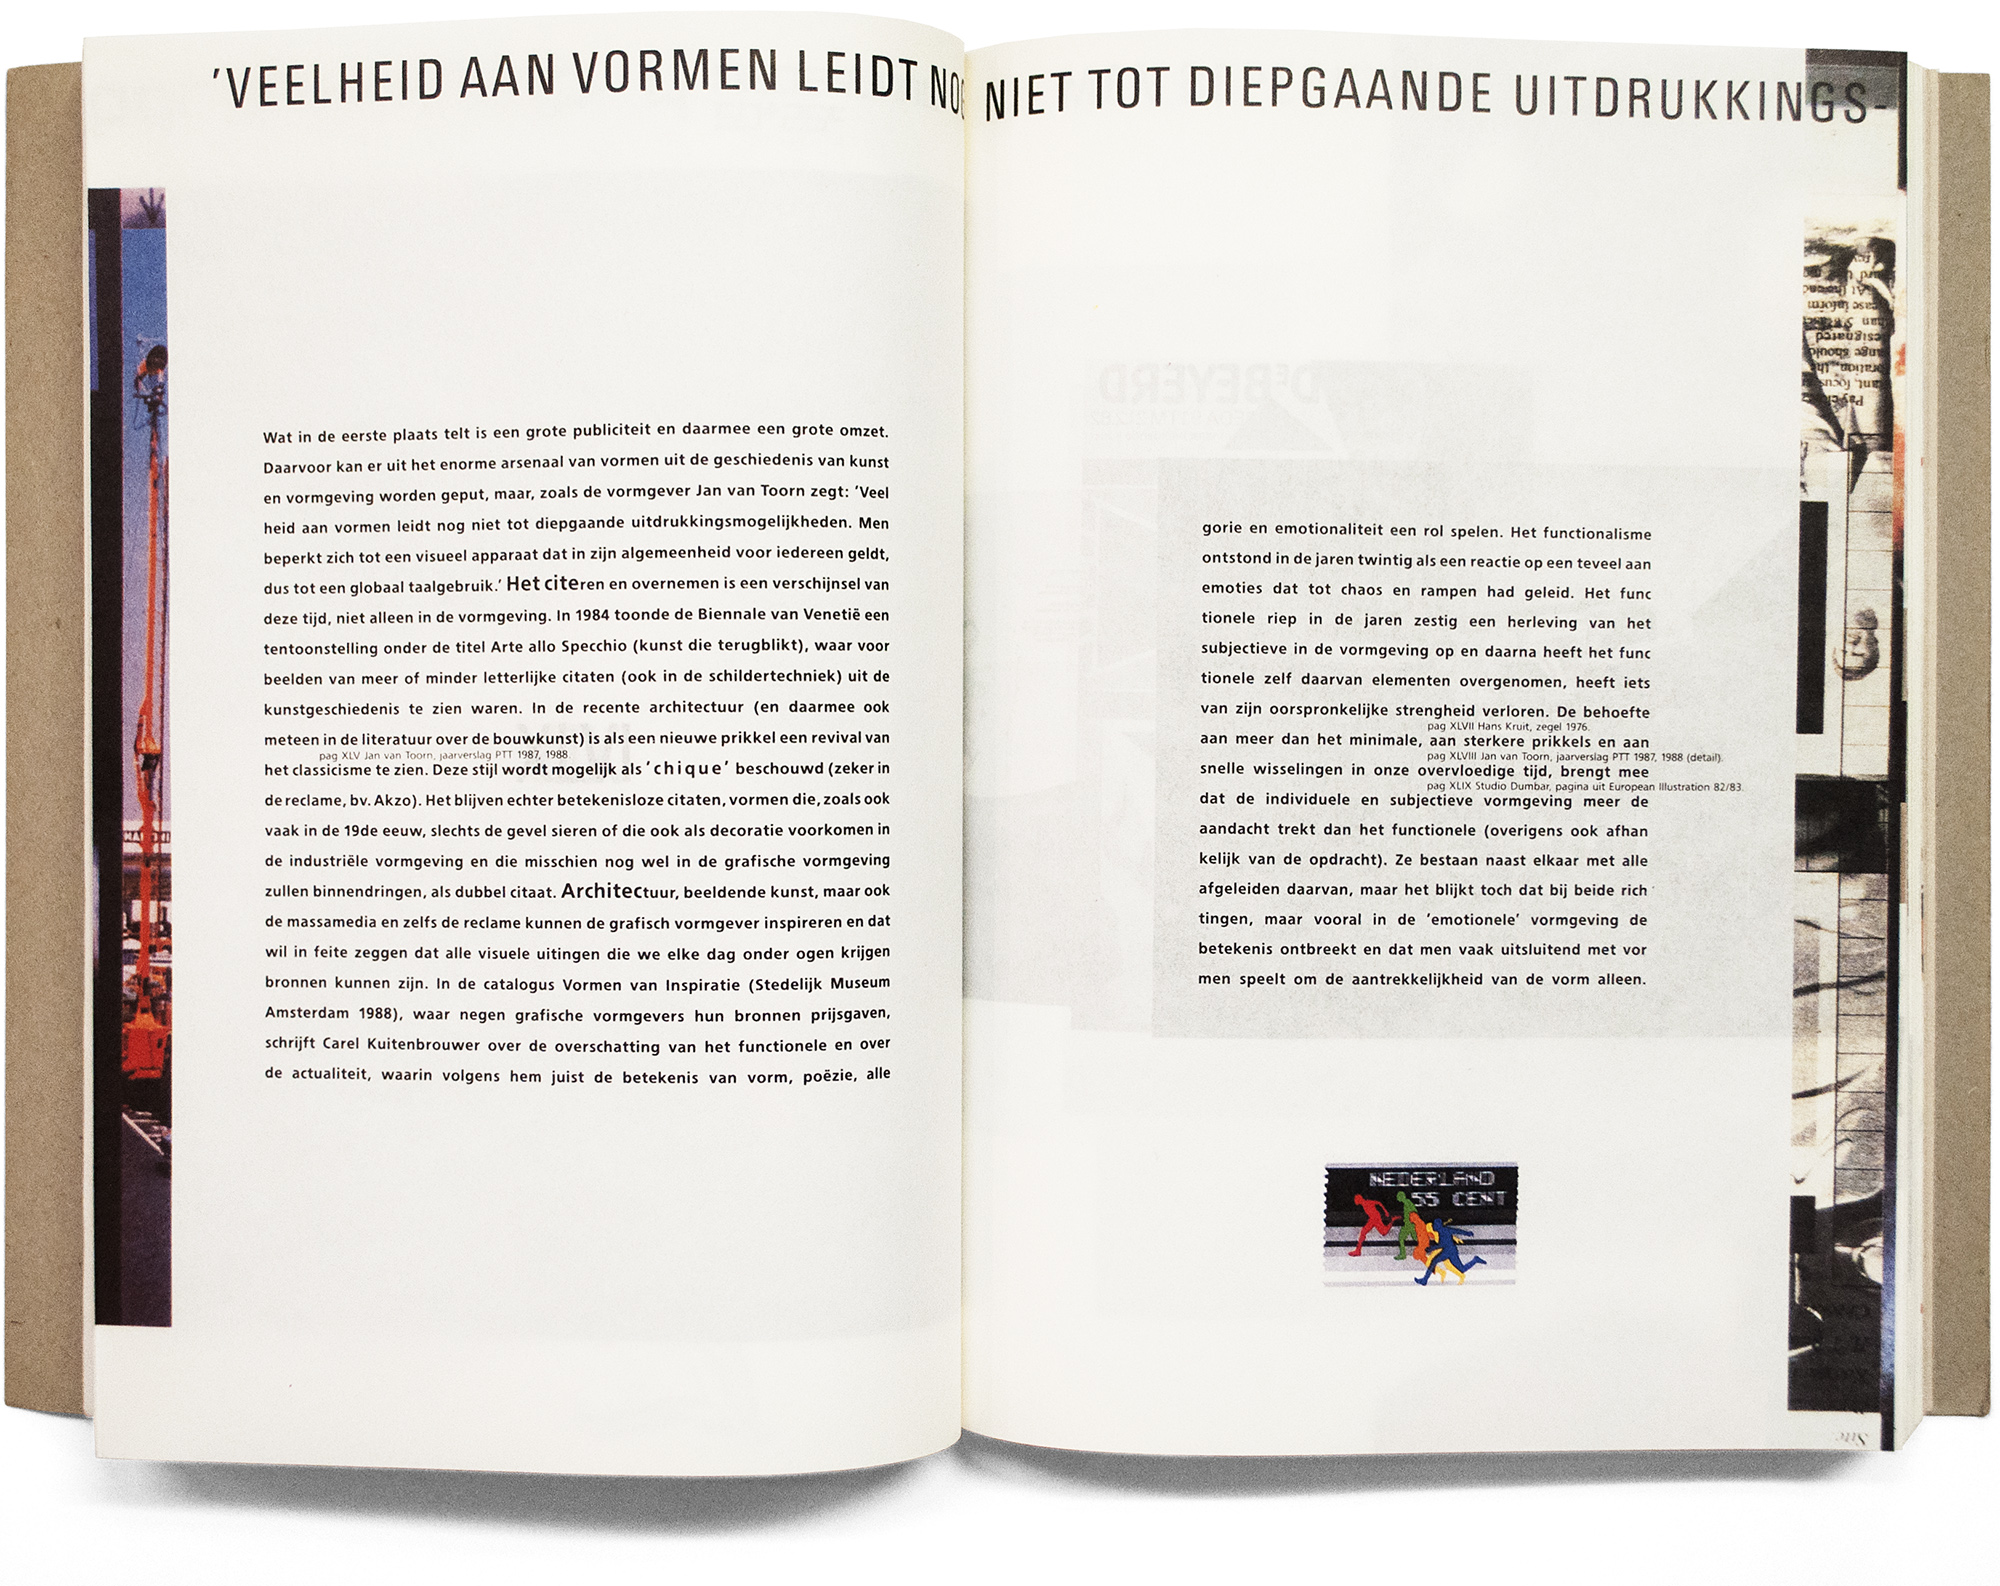 For the 1987/1988 yearbook of the Dutch Postal Service, Irma Boom chose to combine Univers with Frutiger – a rather odd combination, but not impossible. Later in the book Gill Sans joins the Frutiger duo.